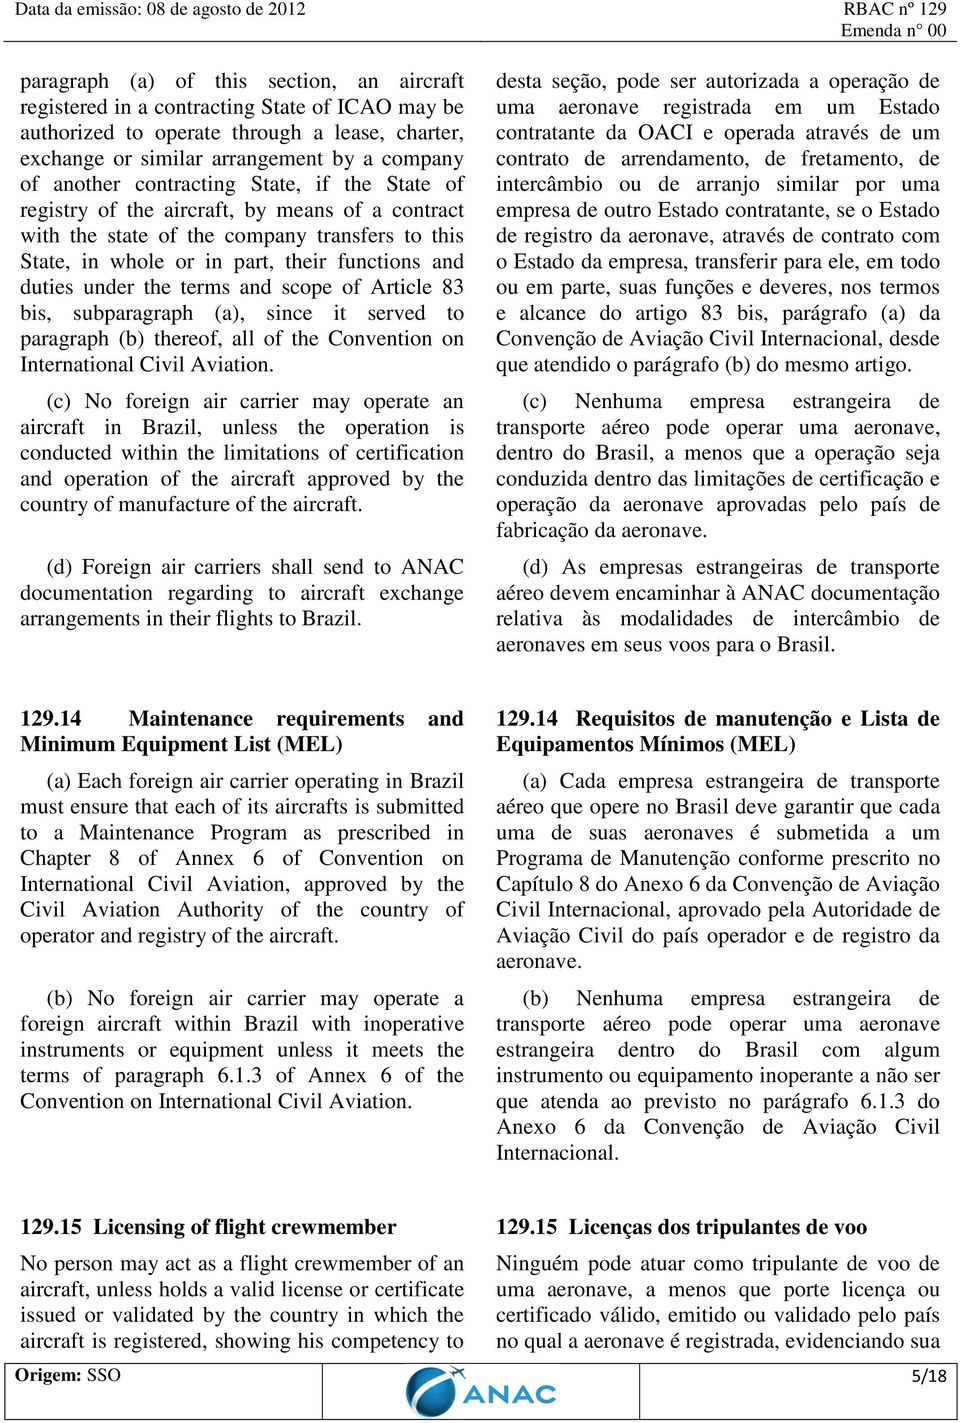 terms and scope of Article 83 bis, subparagraph (a), since it served to paragraph (b) thereof, all of the Convention on International Civil Aviation.